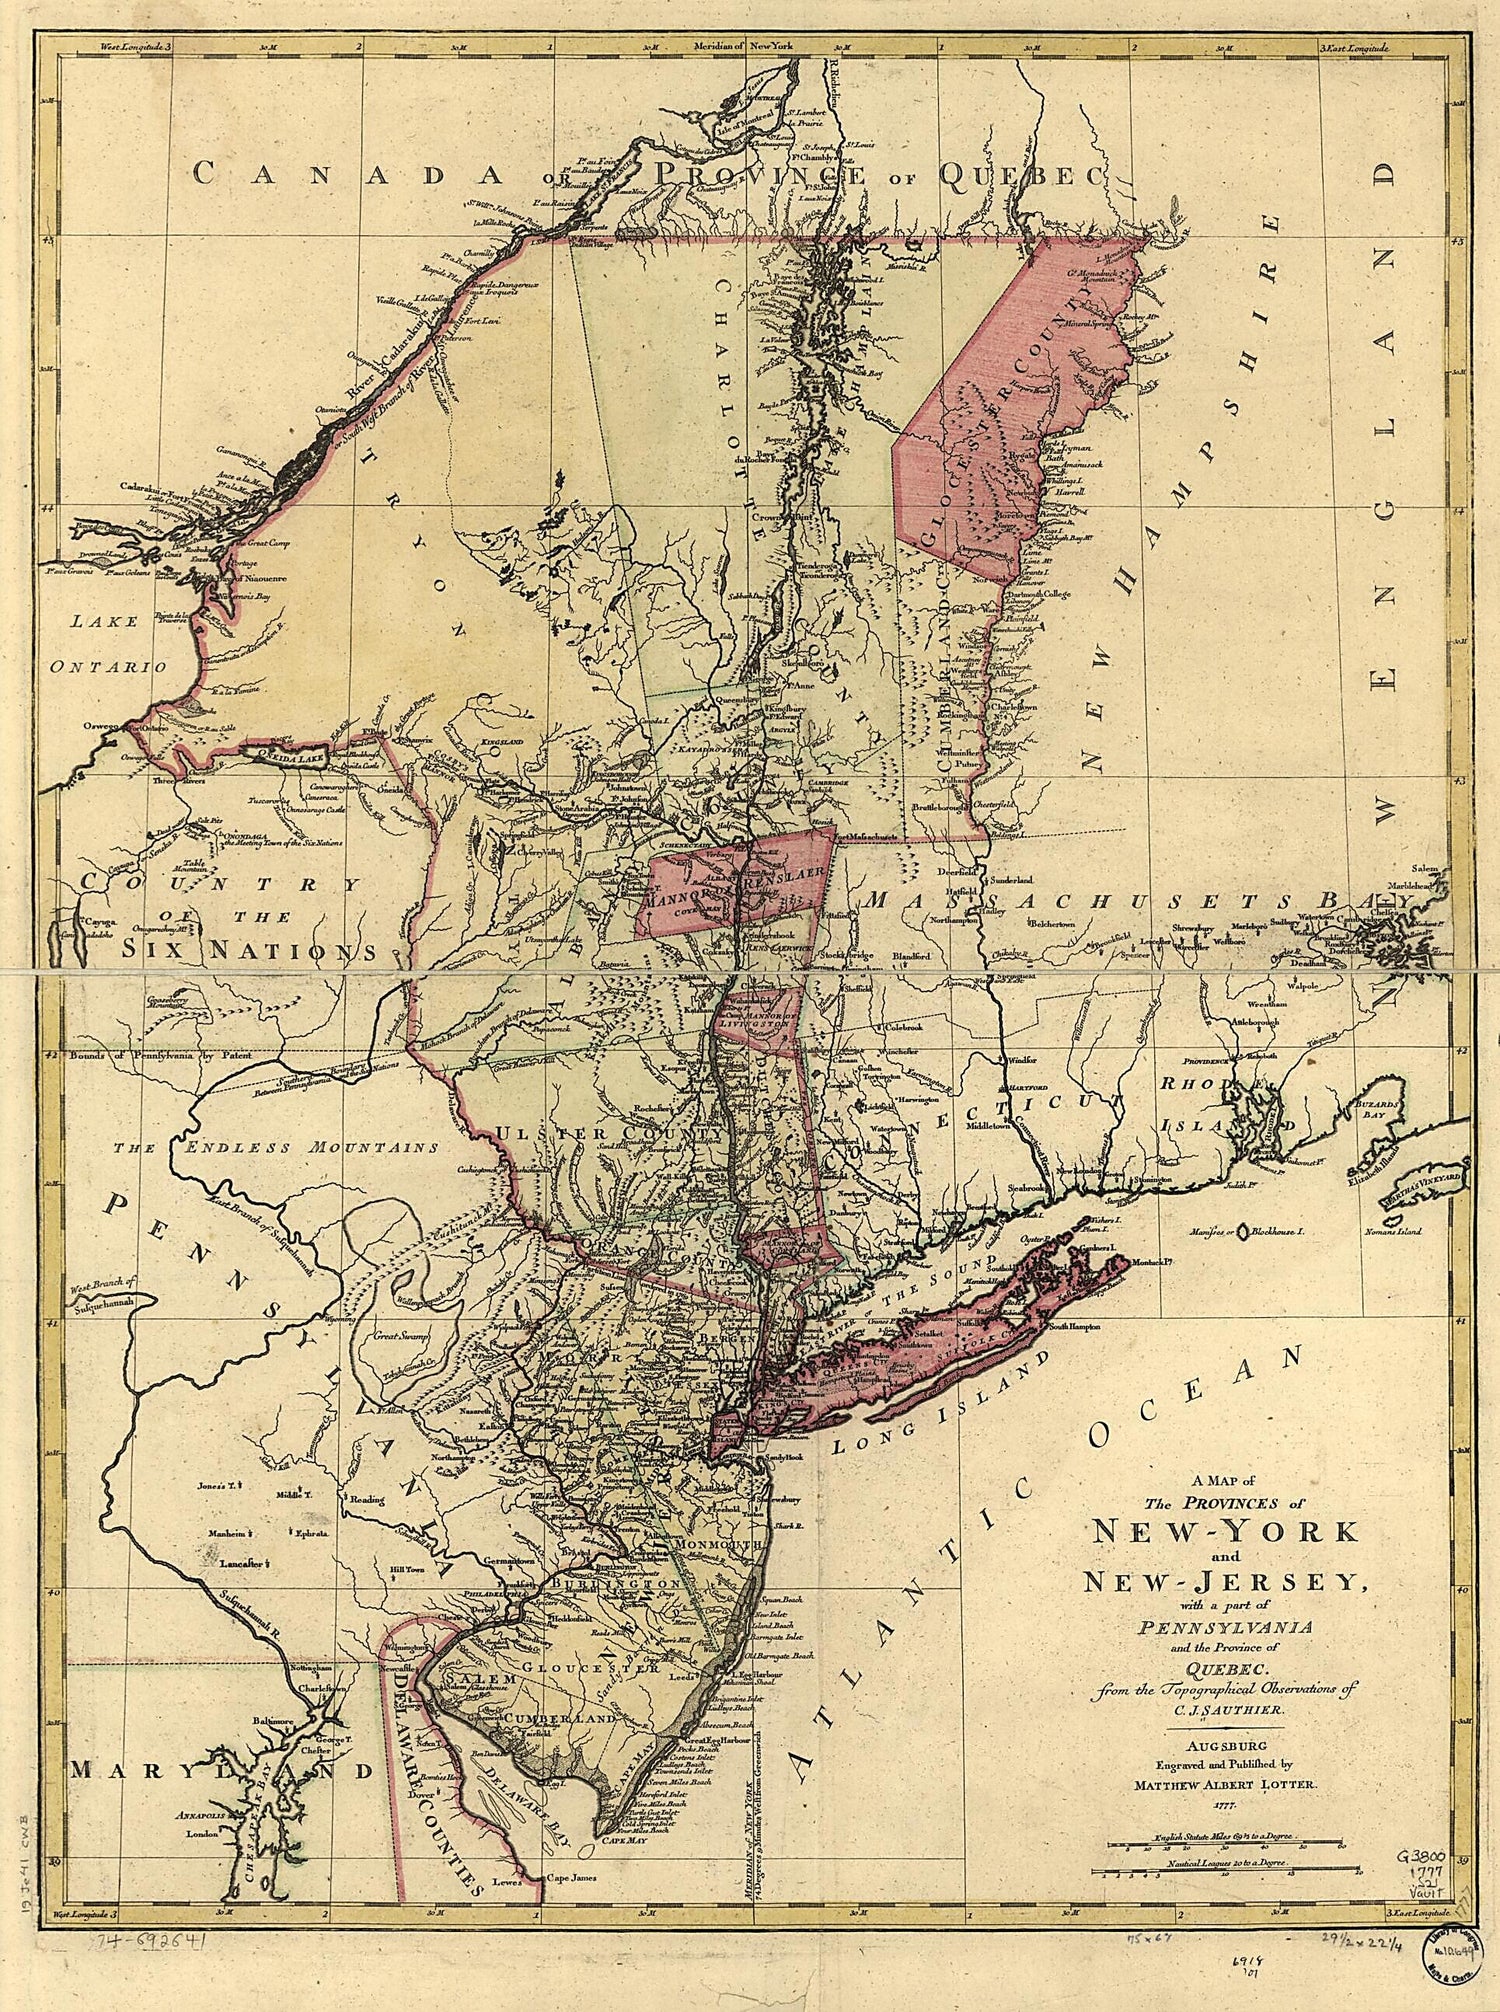 This old map of York and New Jersey, With a Part of Pennsylvania and the Province of Quebec from 1777 was created by Matthäus Albrecht Lotter, Claude Joseph Sauthier in 1777